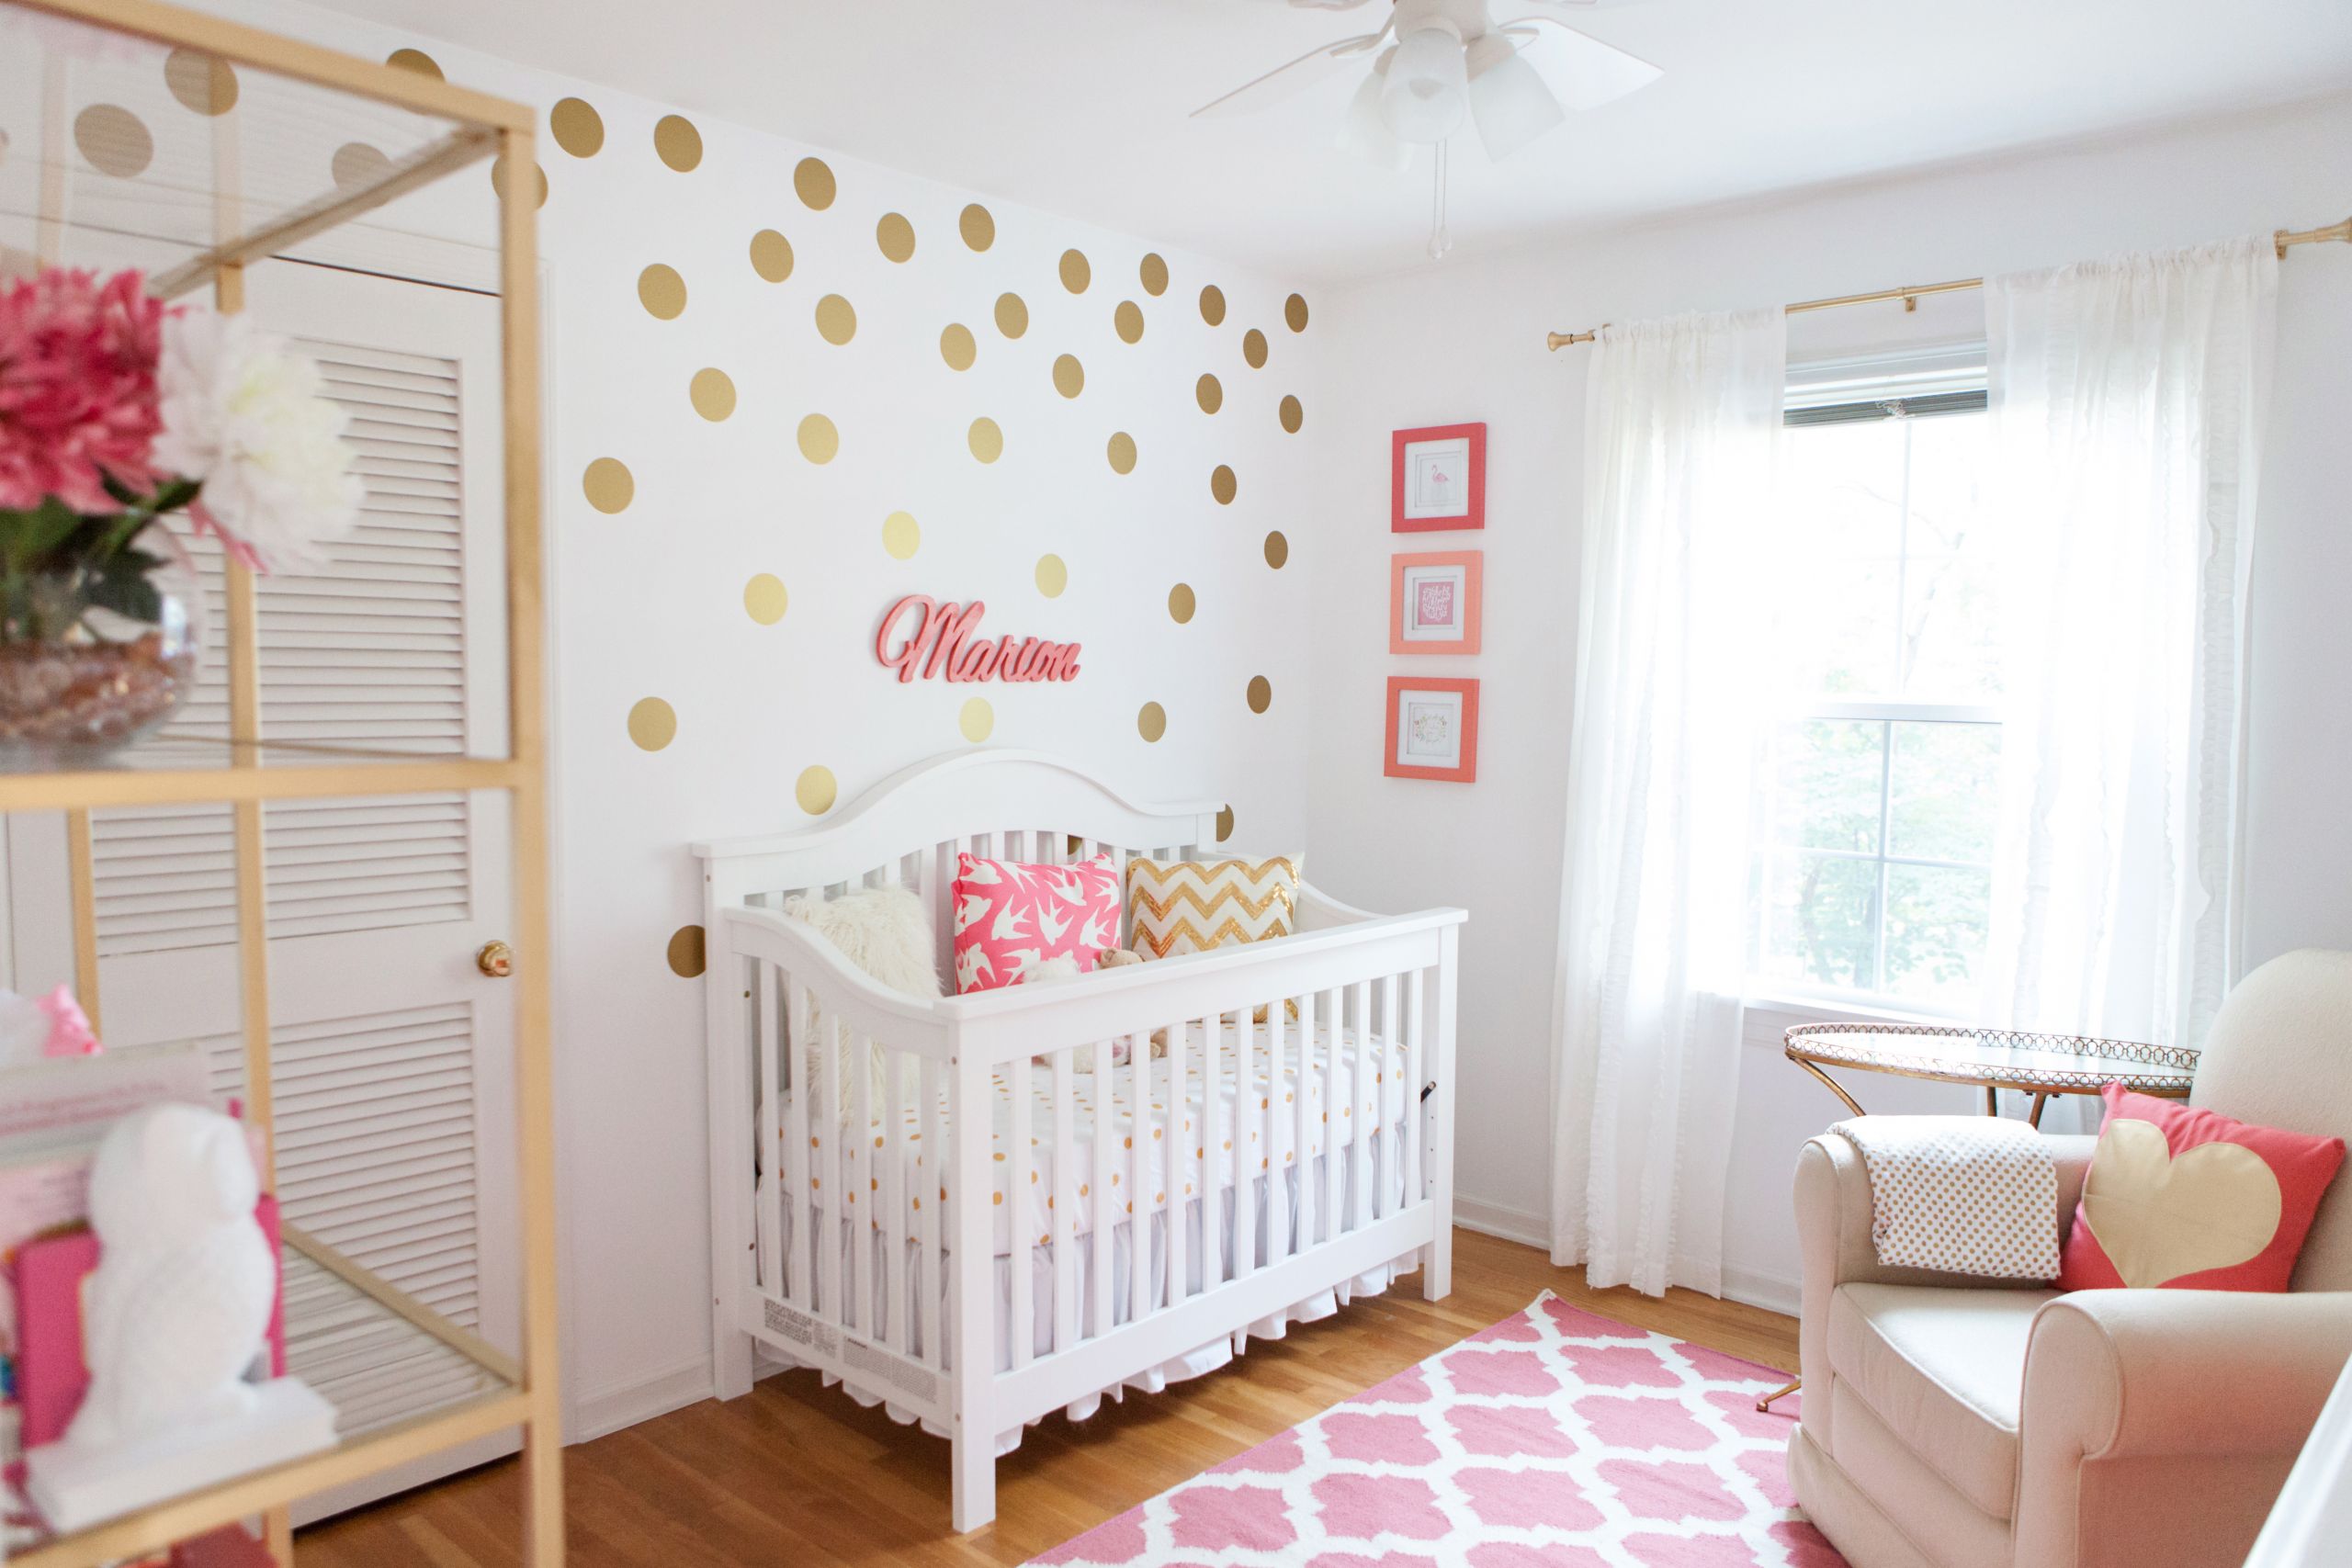 Baby Bedroom Decor Ideas
 Marion s Coral and Gold Polka Dot Nursery Project Nursery